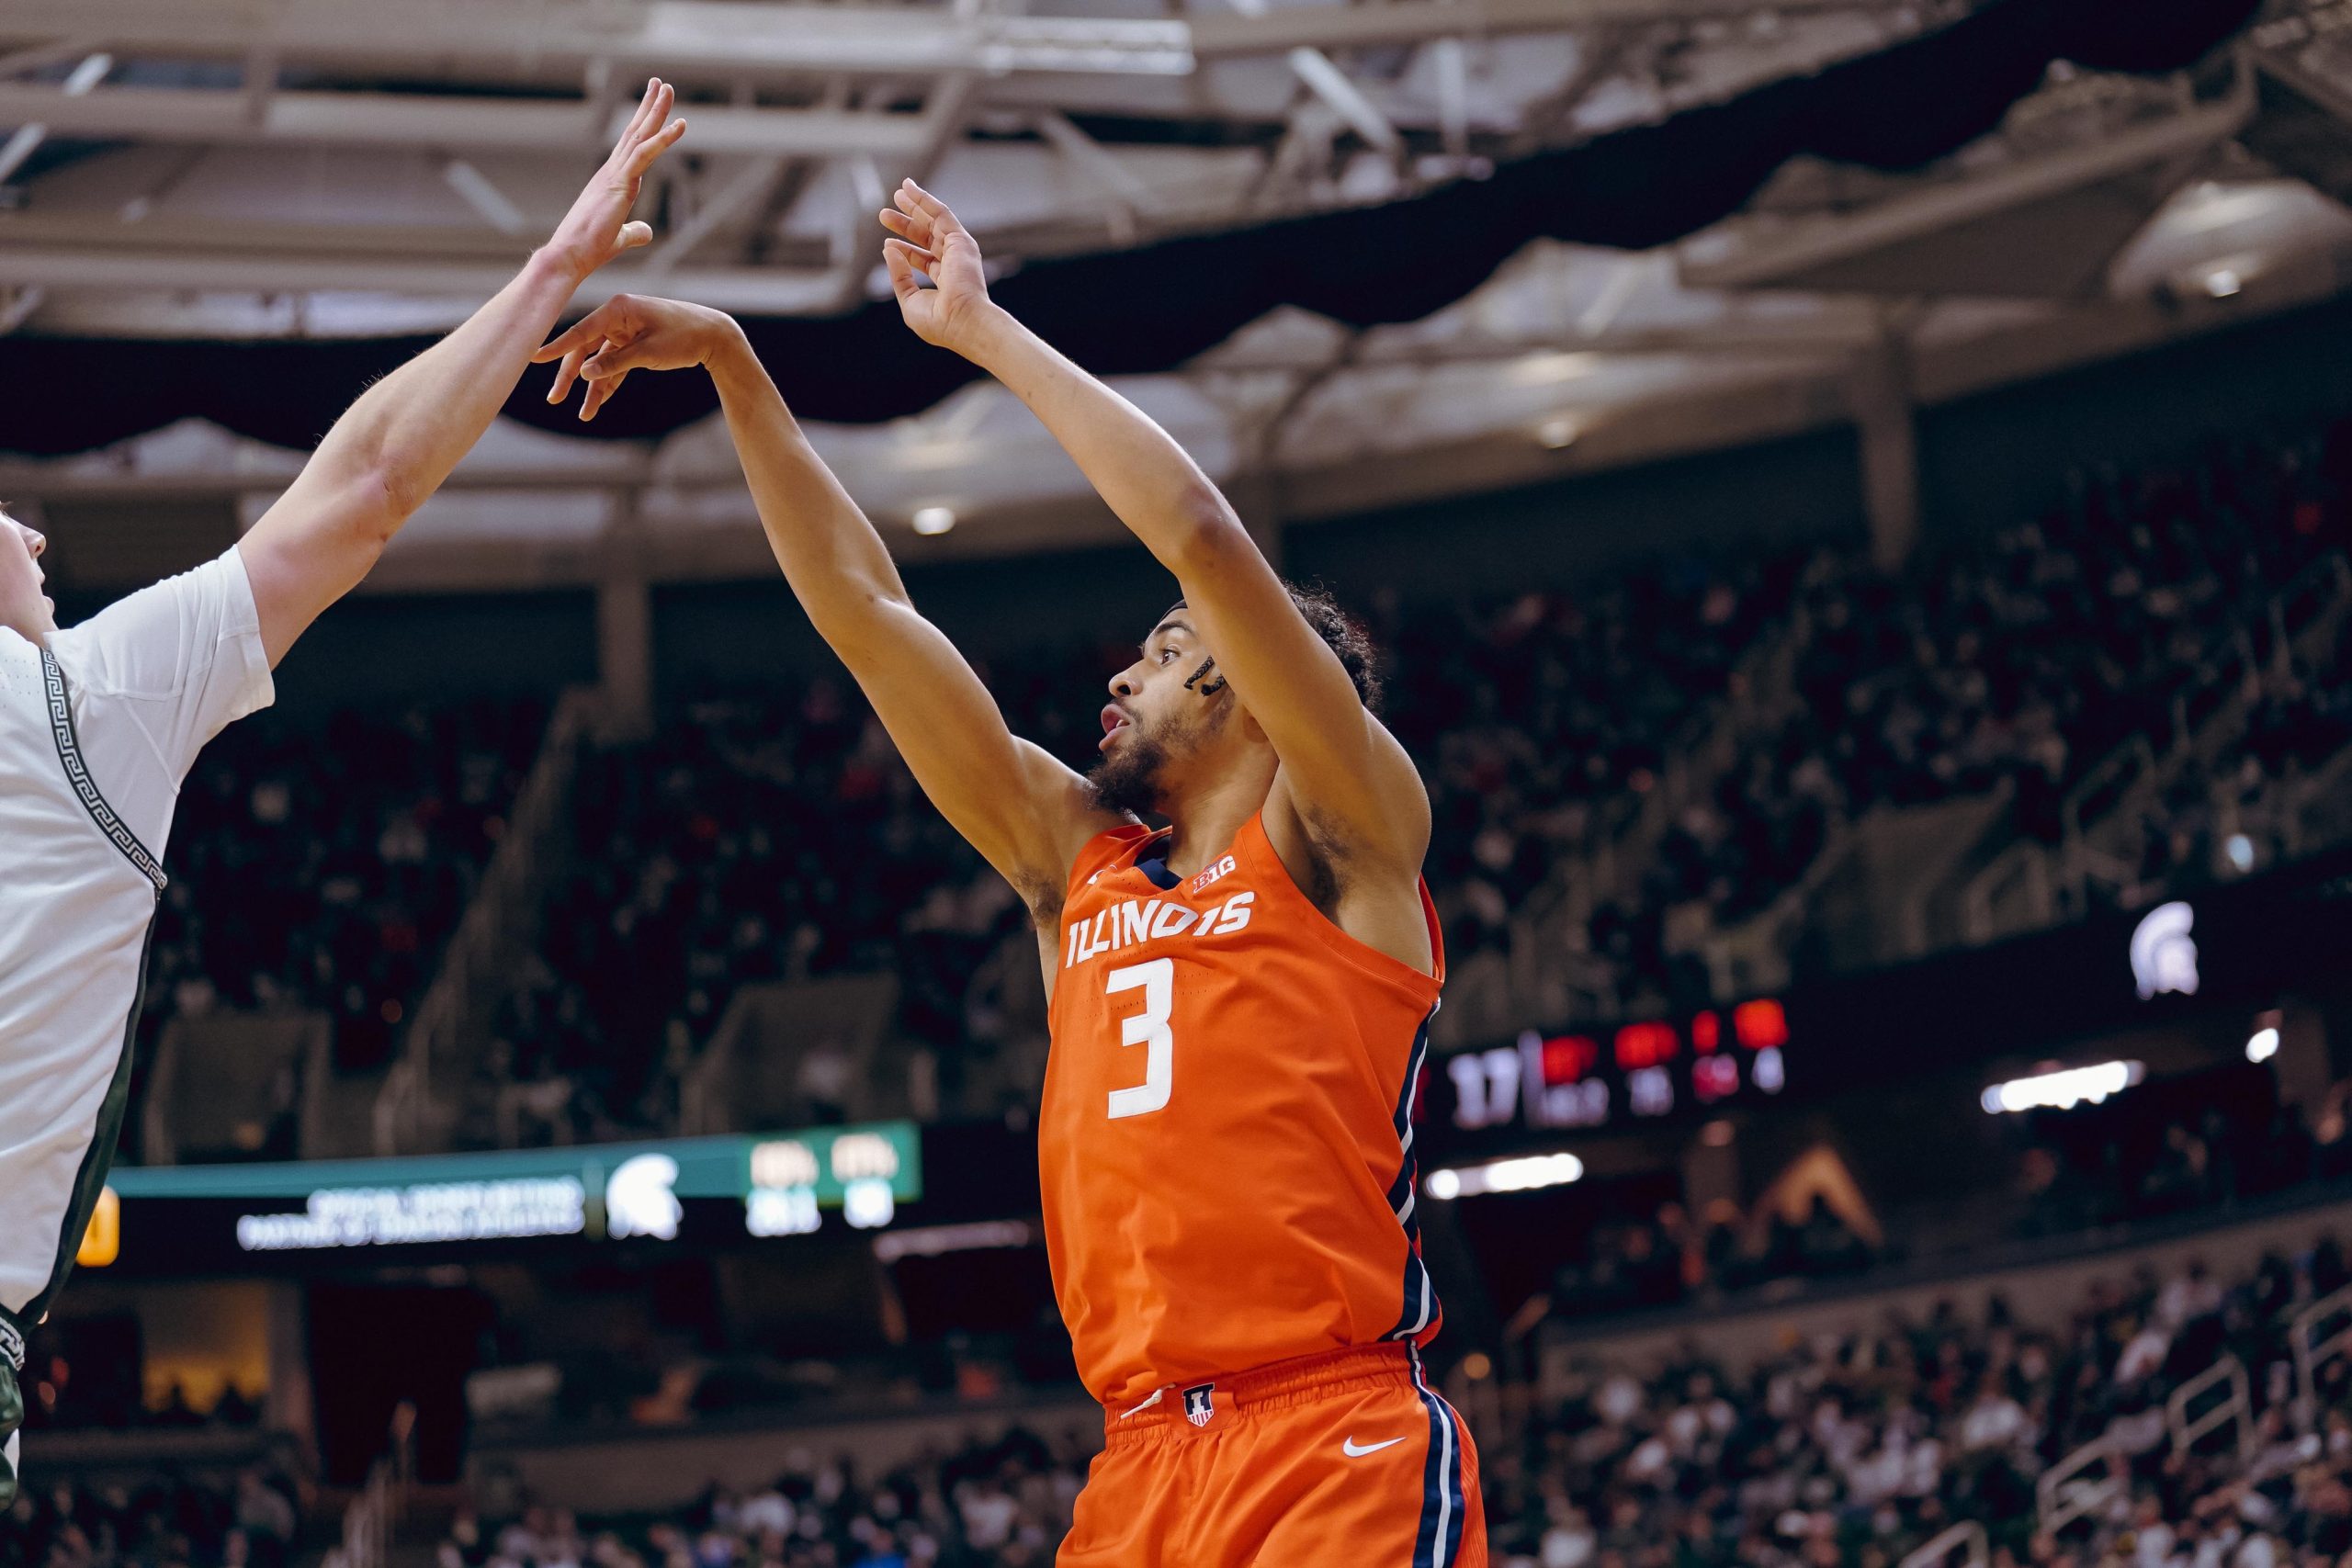 “Nothing new to an older guy like me.”: Illini Veterans Take Control in East Lansing